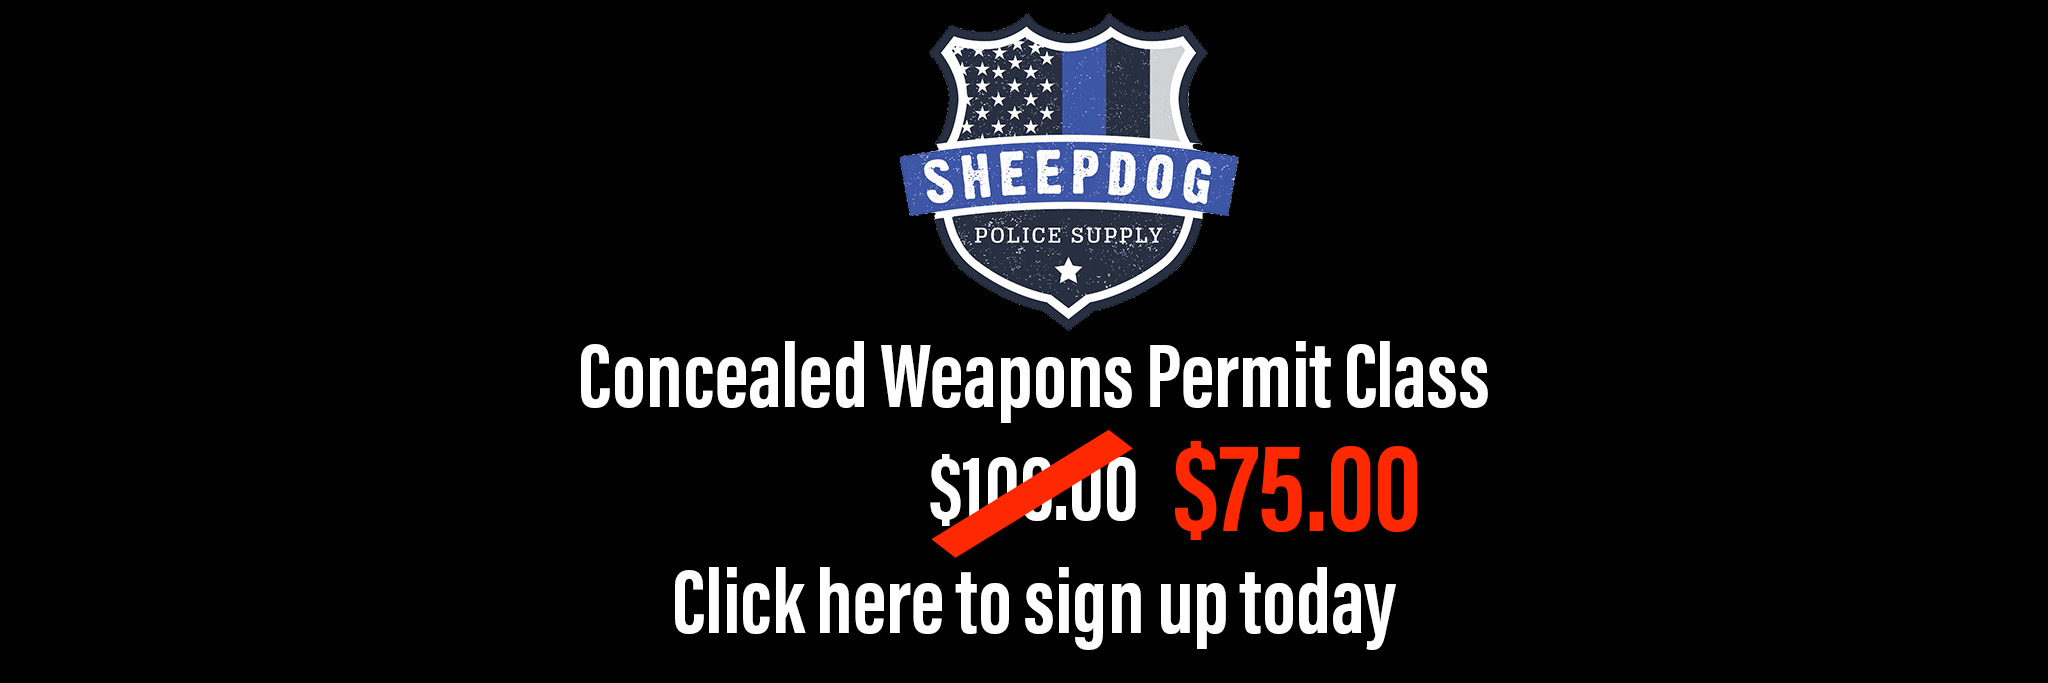 https://www.sheepdogpolicesupply.com/products/711347942365-c-weapons-class-4171